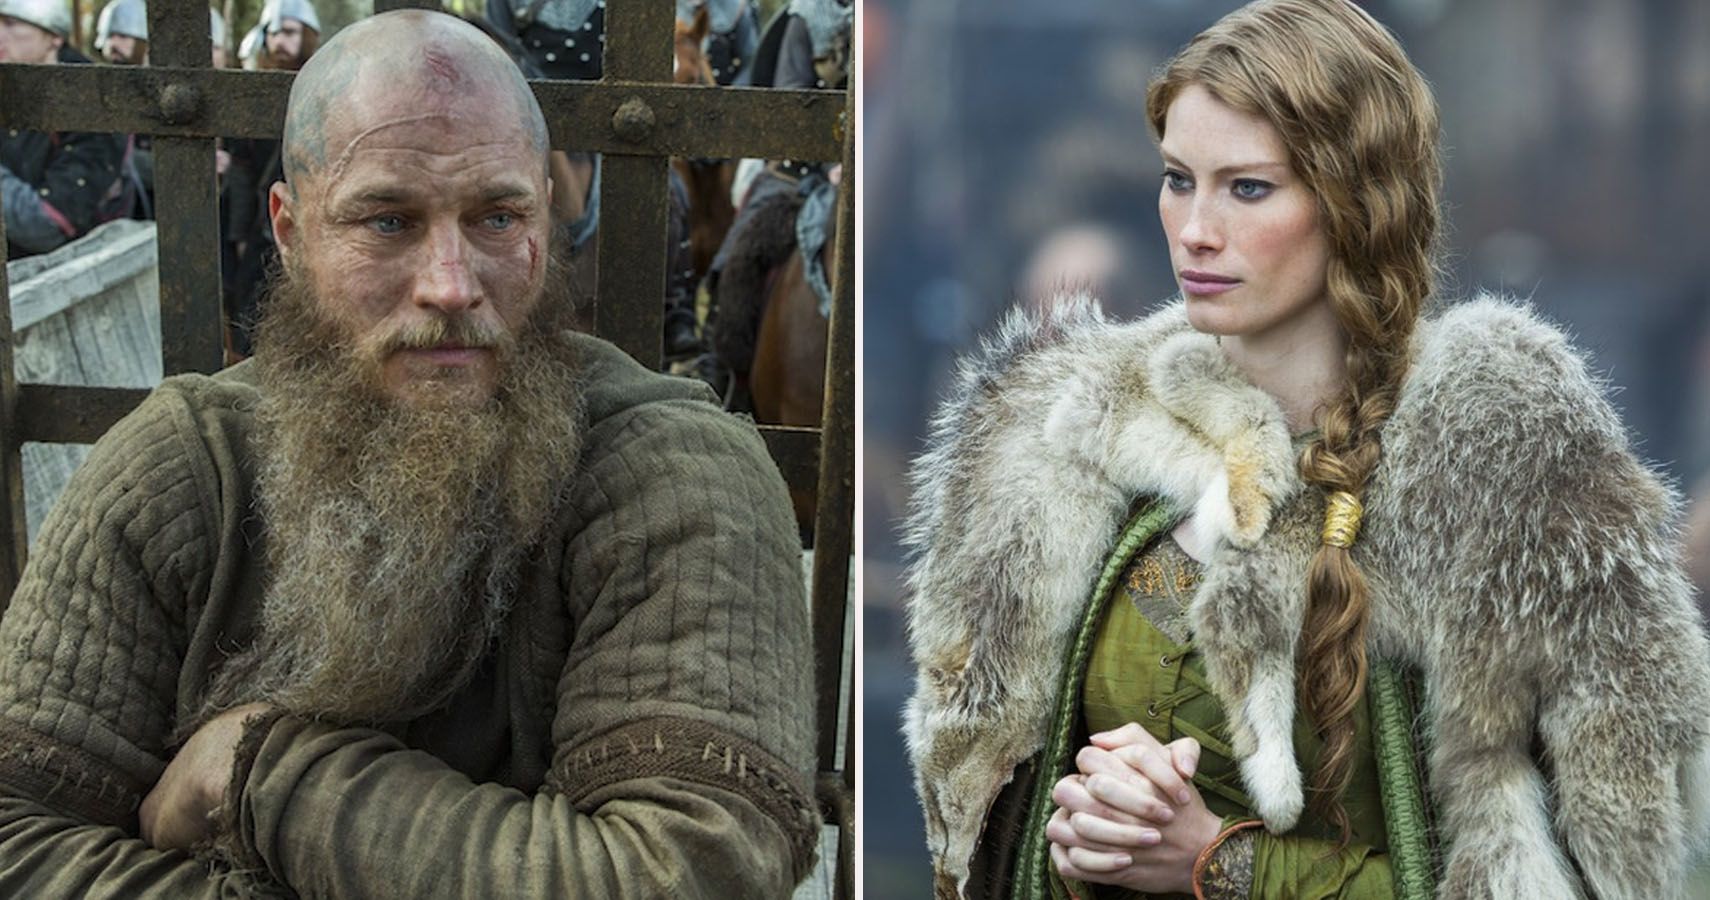 Vikings: What The Cast Has To Say About The Show | TheThings